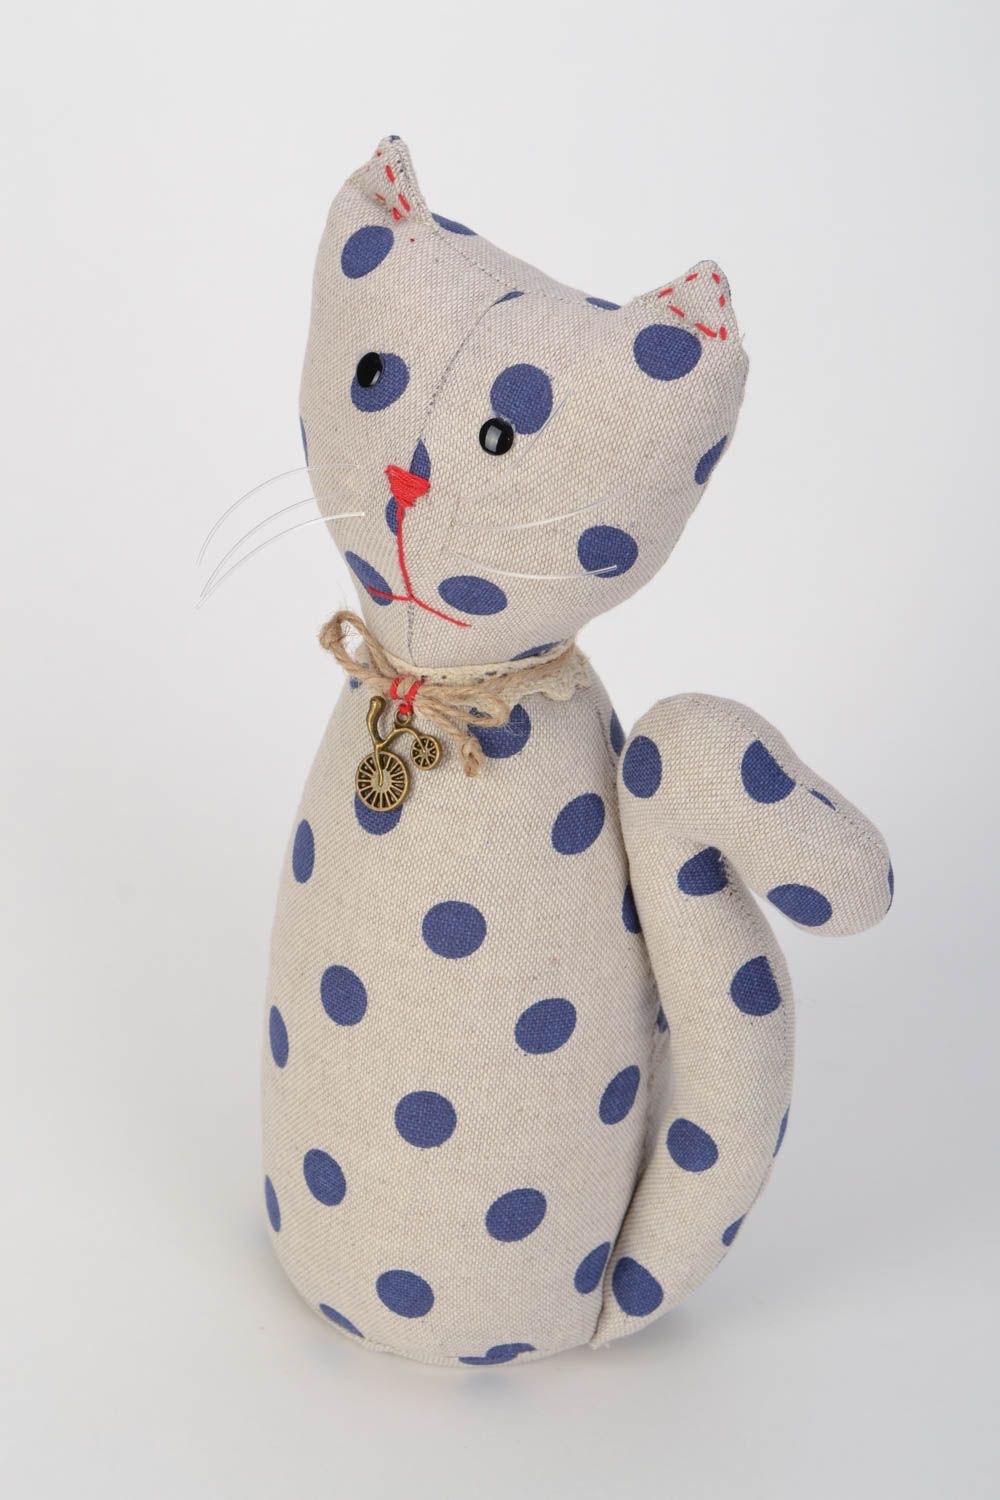 Handmade soft toy sewn of light blue polka dot fabric in the shape of cat photo 3